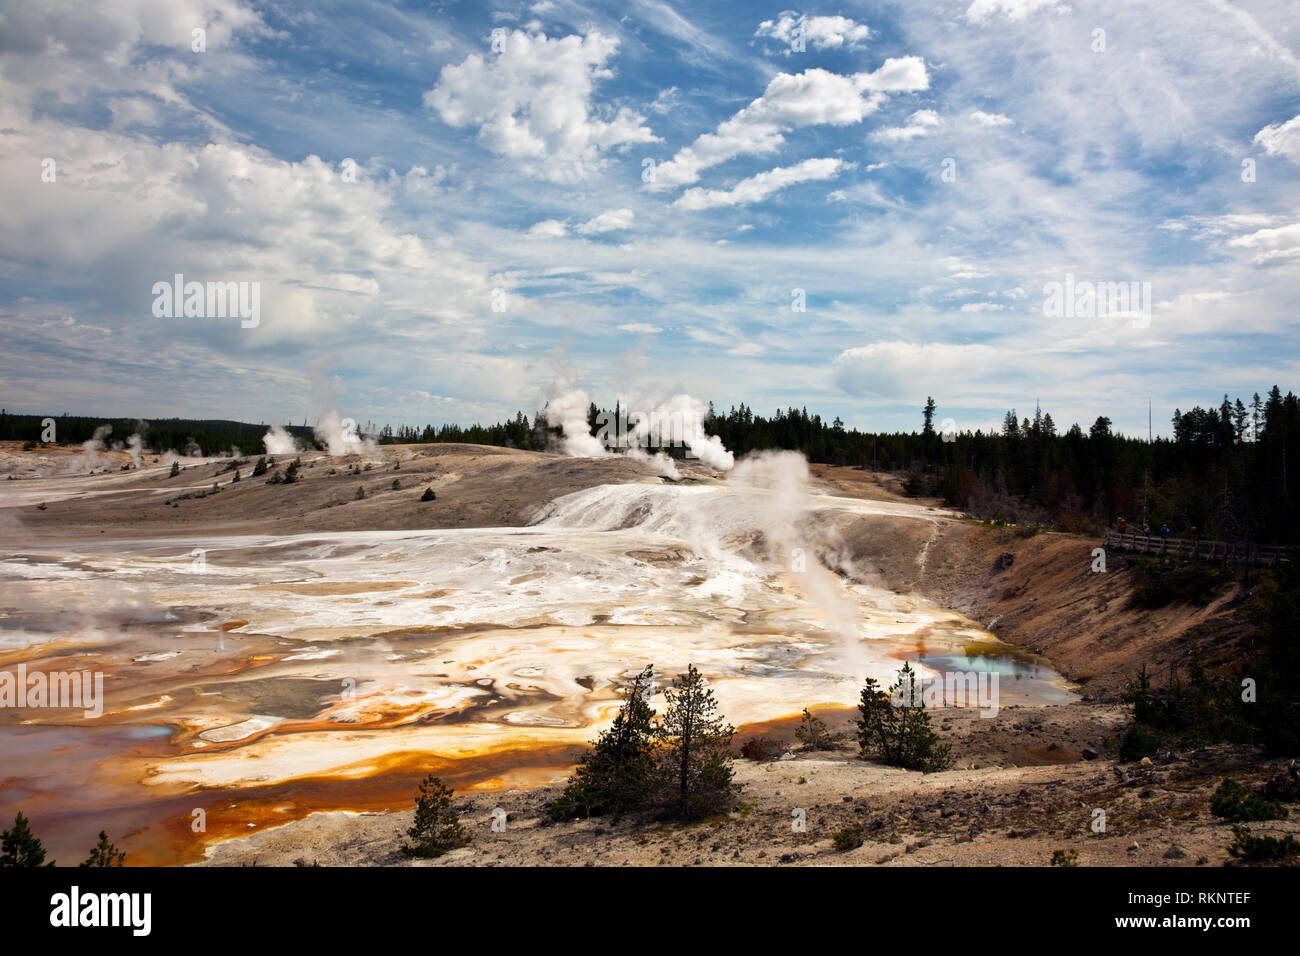 WY03434-00...WYOMING - Porcelain Basin area of Norris Geyser Basin in Yellowstone National Park. Stock Photo